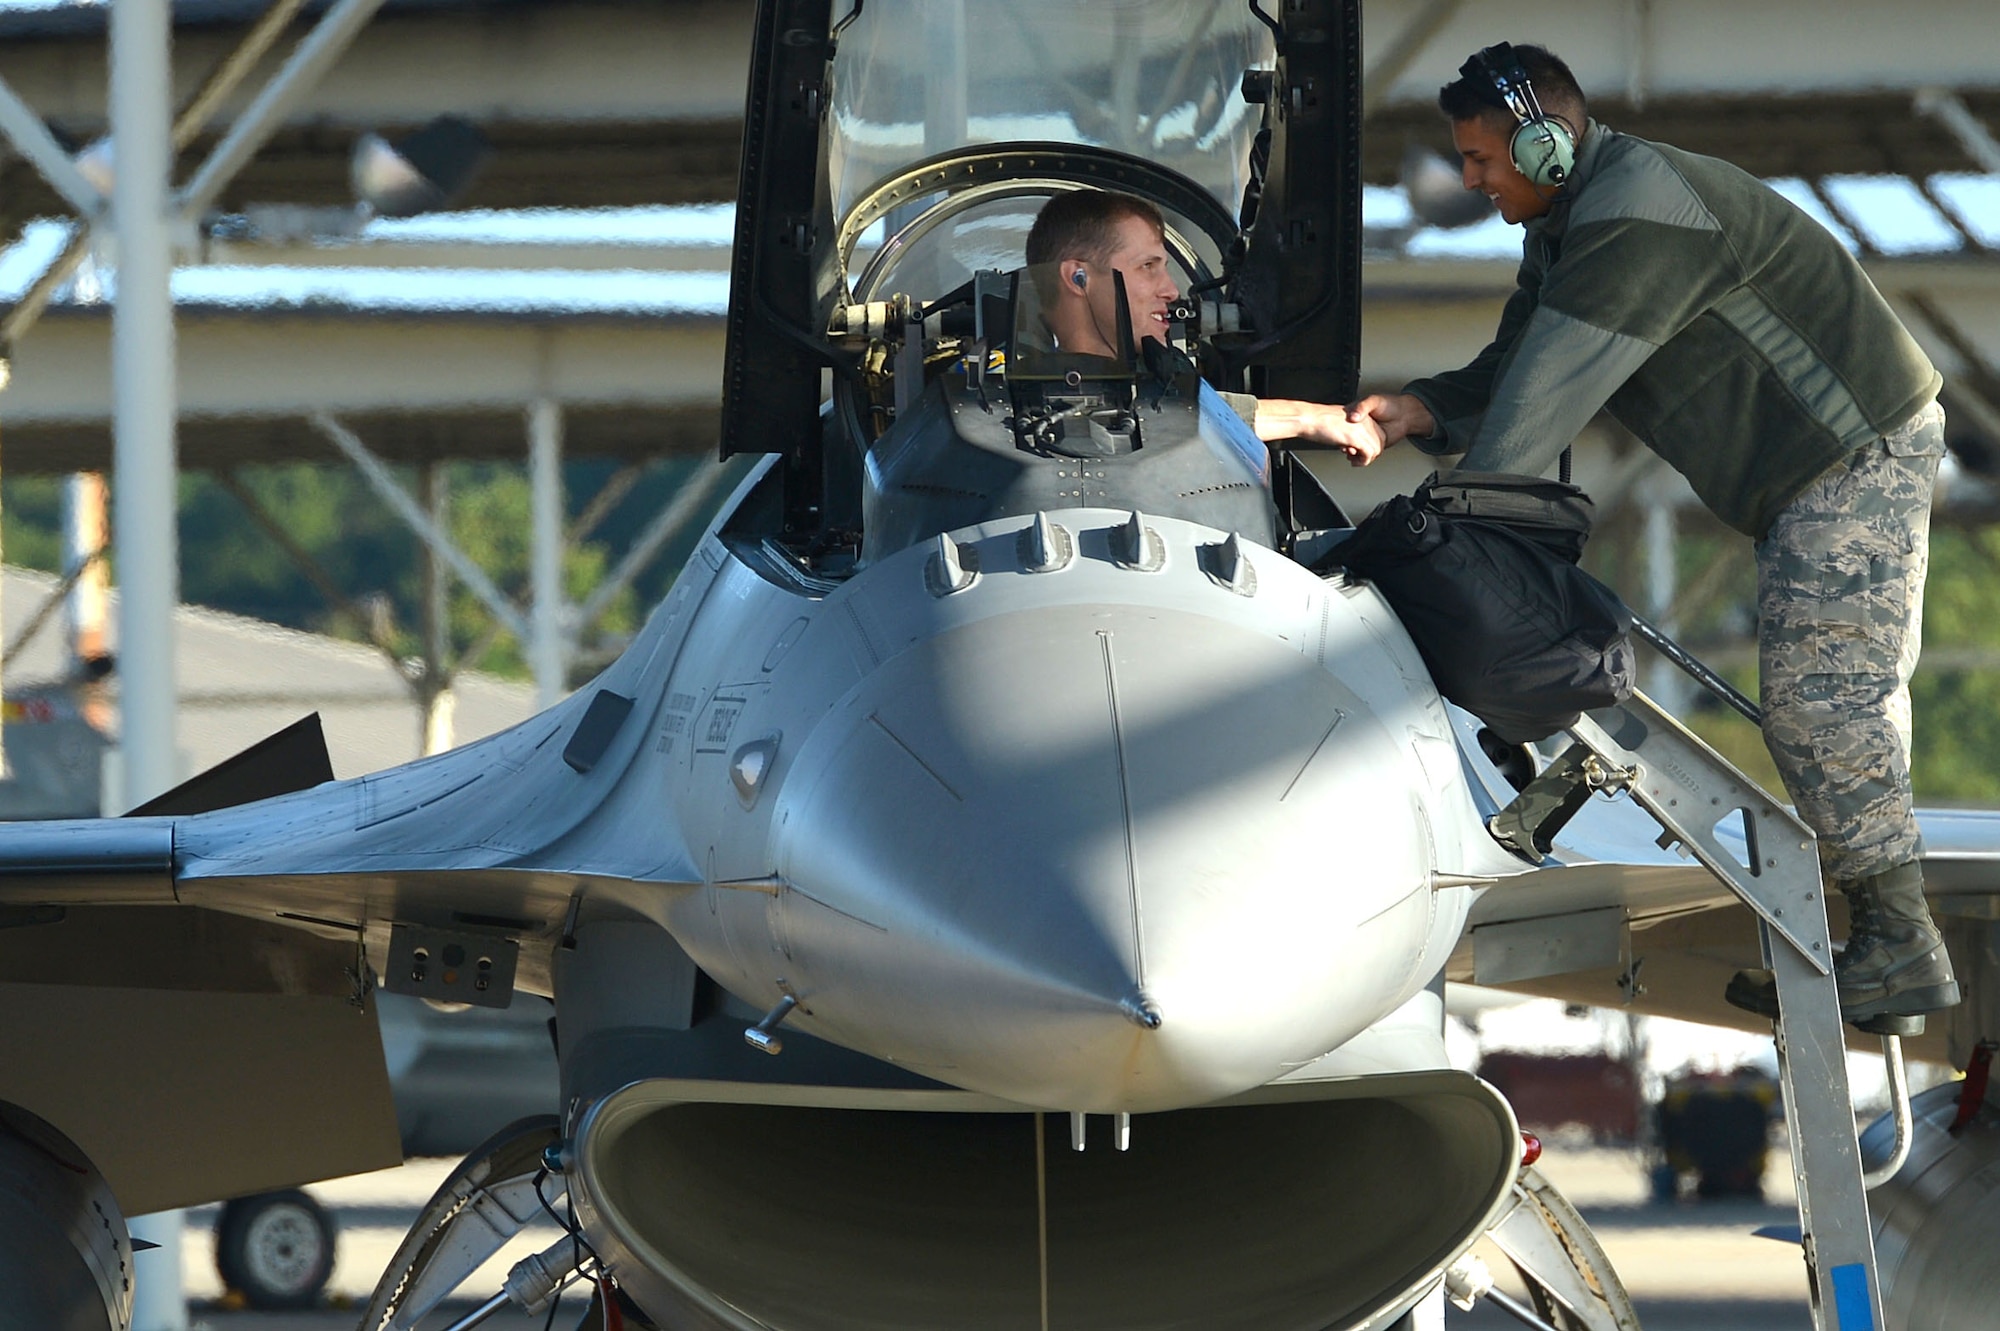 An F-16CM Fighting Falcon pilot assigned to the 20th Fighter Wing shakes hands with a tactical aircraft maintainer assigned to the 20th Aircraft Maintenance Squadron during an aircraft evacuation at Shaw Air Force Base, S.C., Oct. 6, 2016. Forty-eight F-16s were evacuated from Shaw in anticipation of Hurricane Matthew, which hit South Carolina as a Category 2 hurricane. (U.S. Air Force photo by Airman 1st Class Christopher Maldonado)